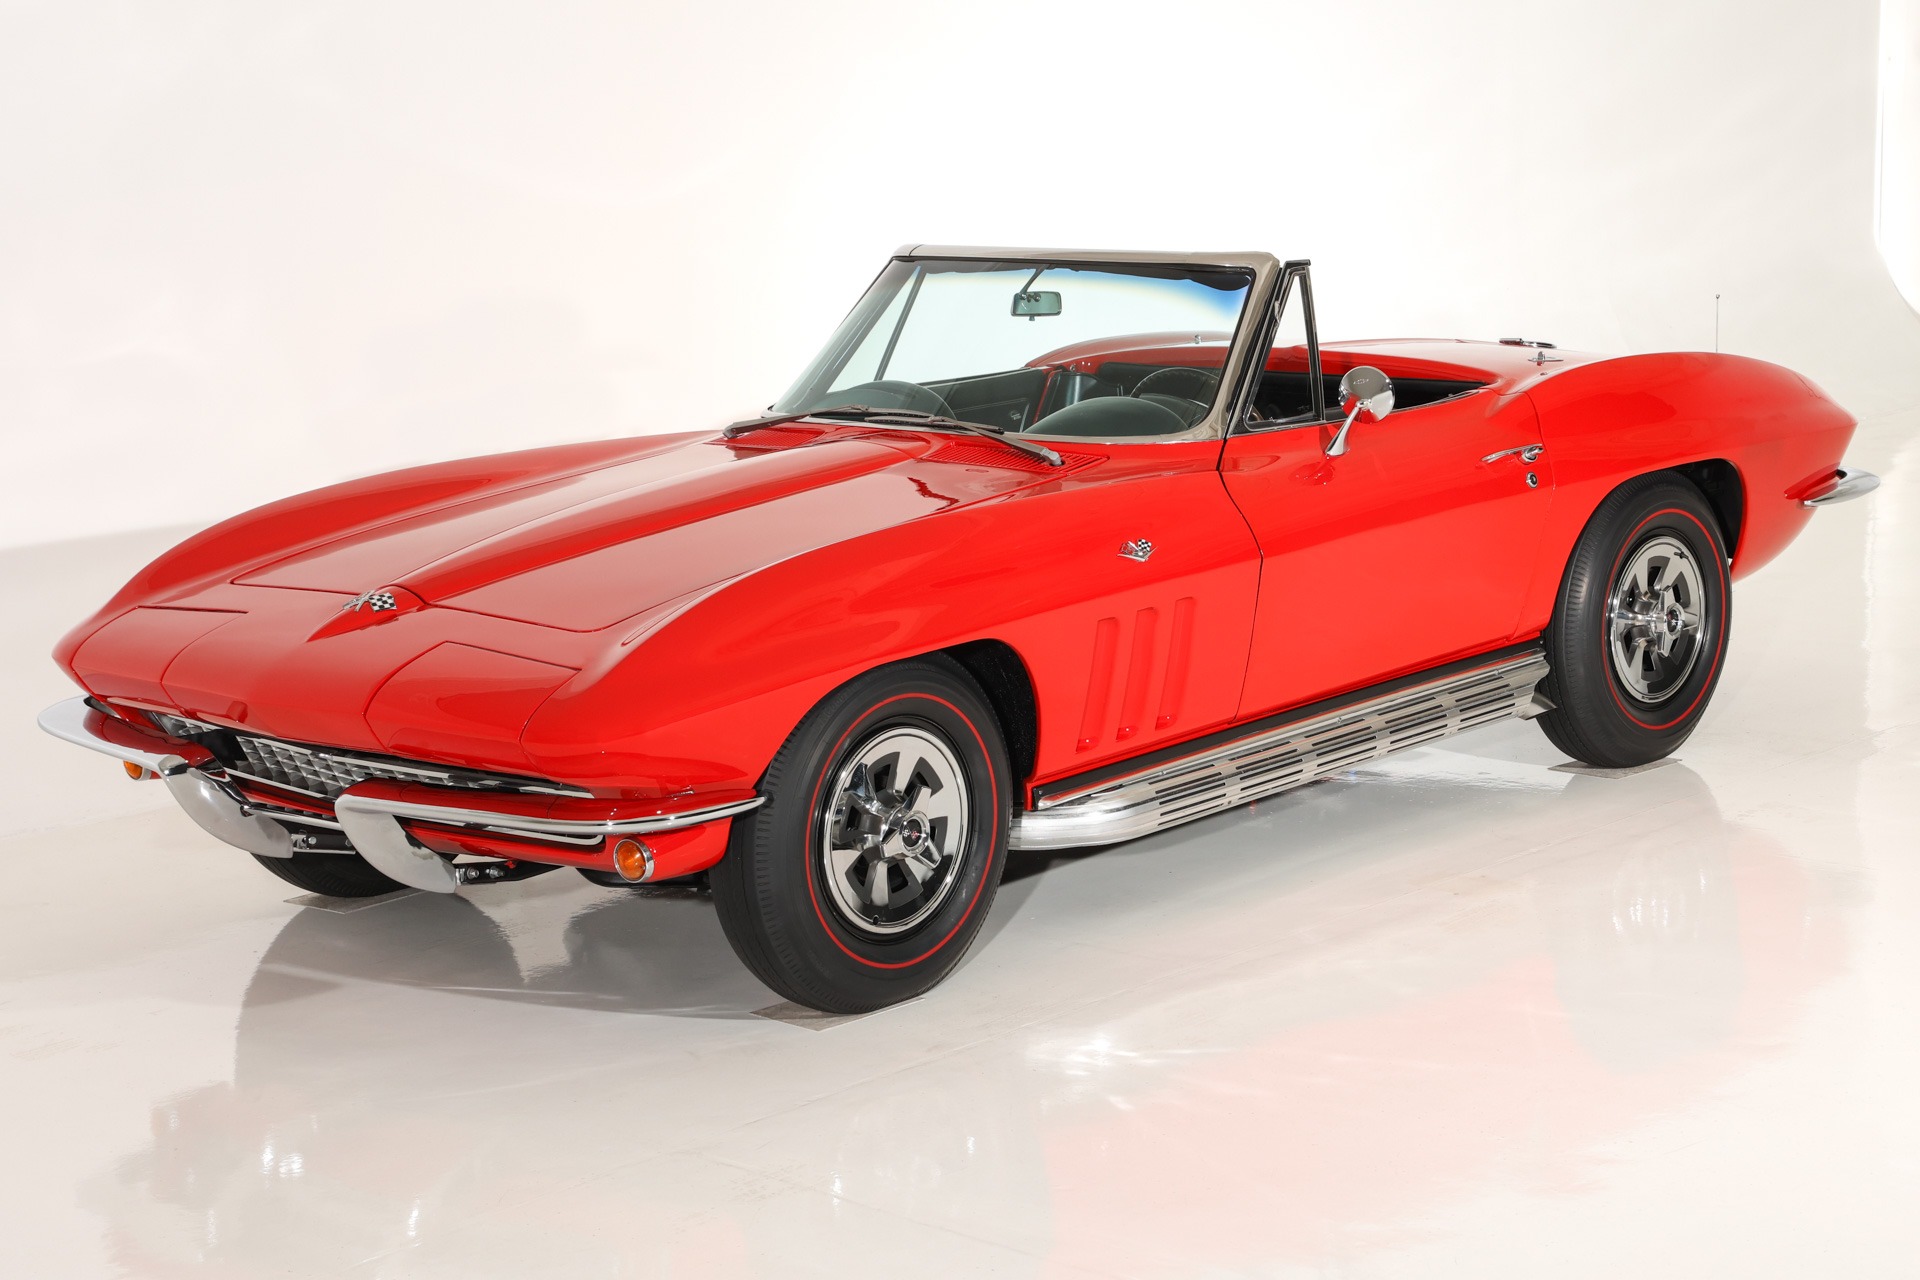 For Sale Used 1965 Chevrolet Corvette 350ci, 4-Speed, Side Exhaust | American Dream Machines Des Moines IA 50309